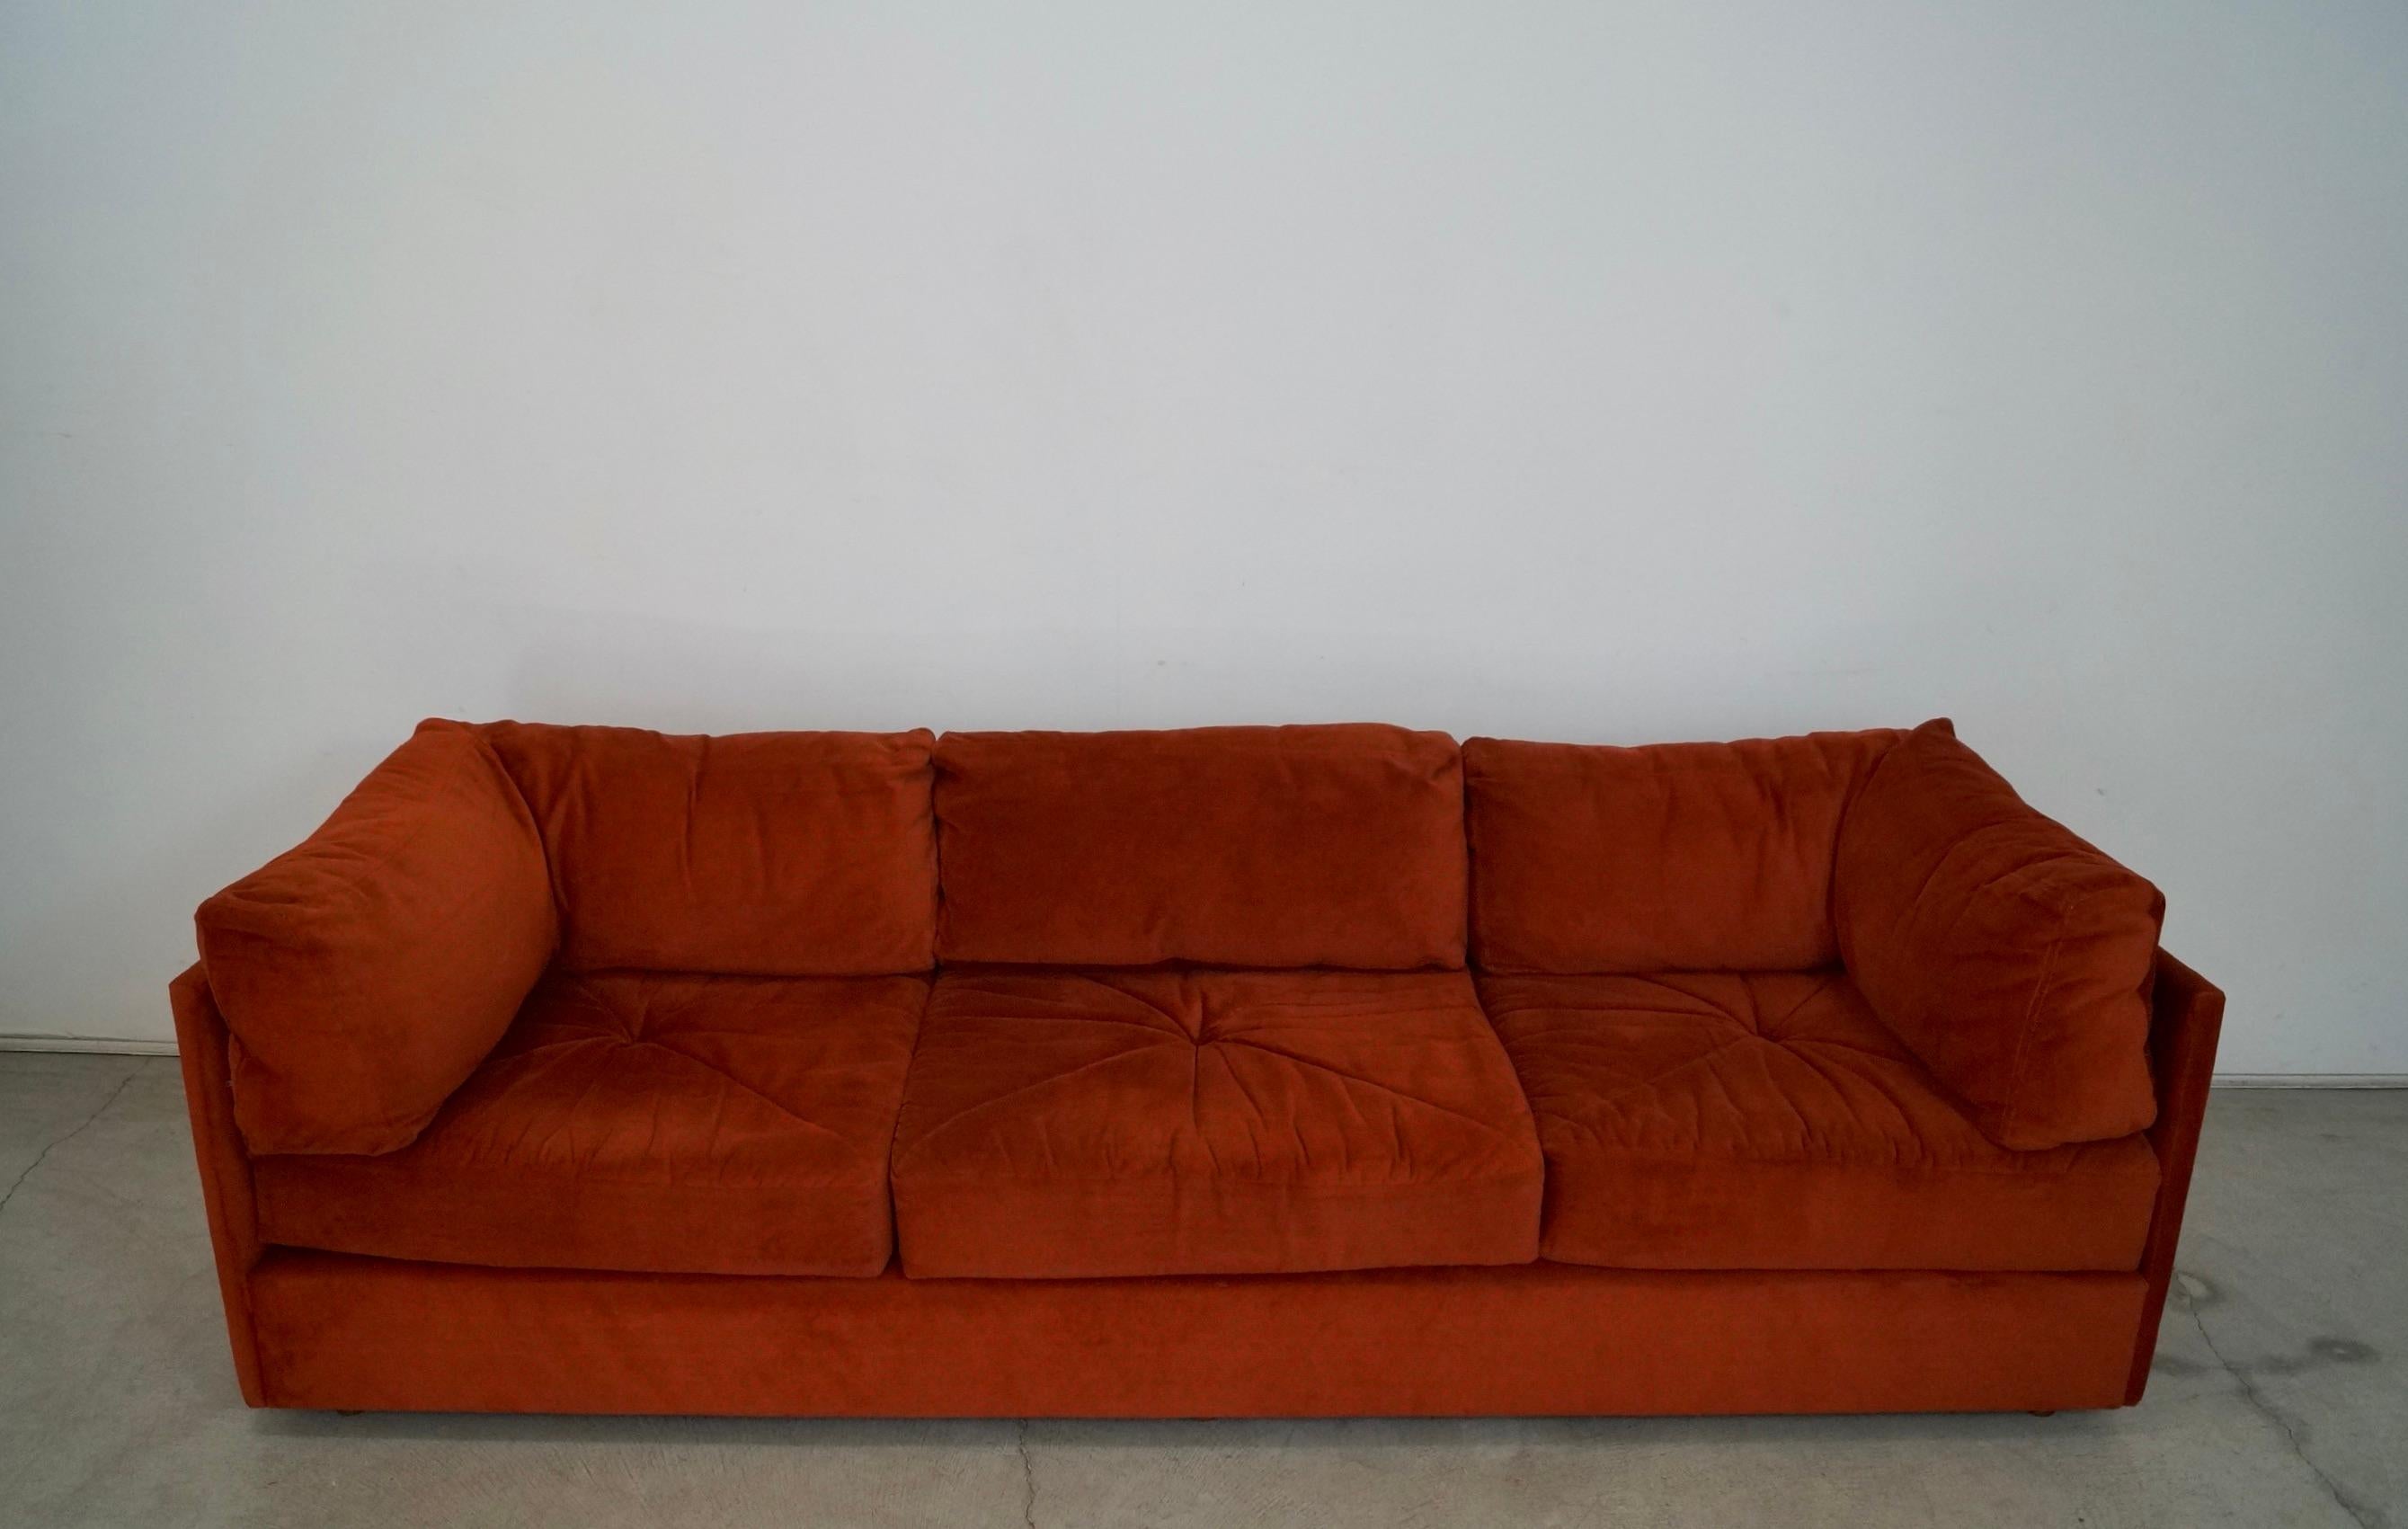 Vintage Midcentury Modern lounge couch for sale. Manufactured by Selig, and is a design classic. Has the original rust burnt orange fabric in a soft velveteen fabric in excellent vintage condition. Comes with six cushions, and all have zippers that